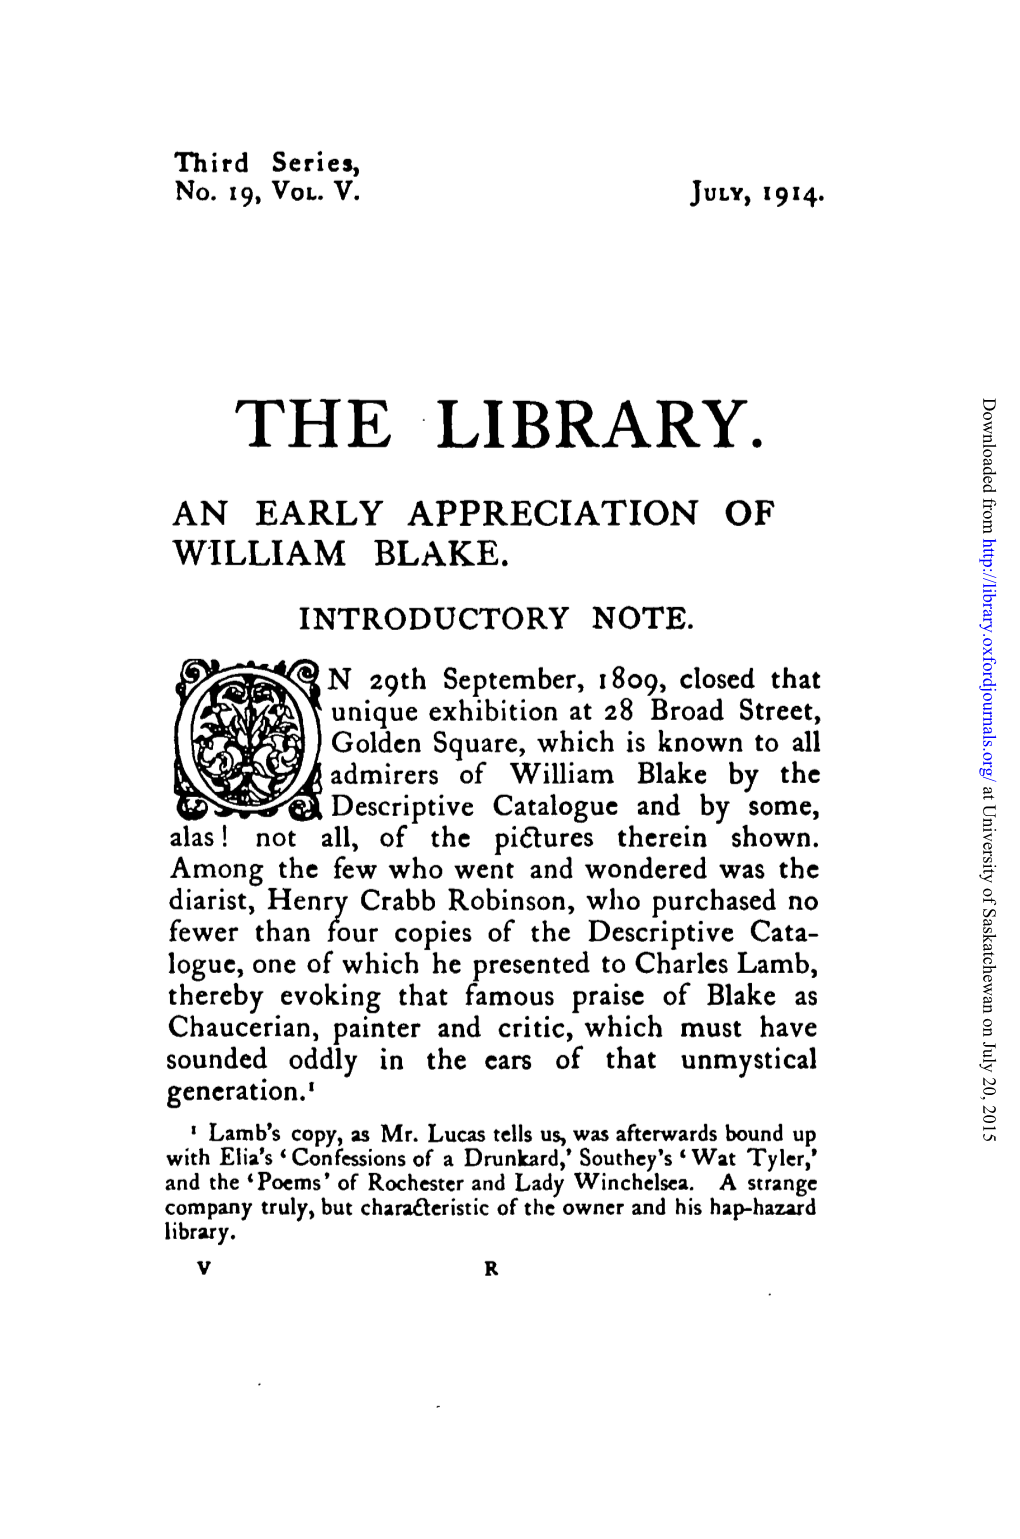 THE LIBRARY. Downloaded from an EARLY APPRECIATION of WILLIAM BLAKE